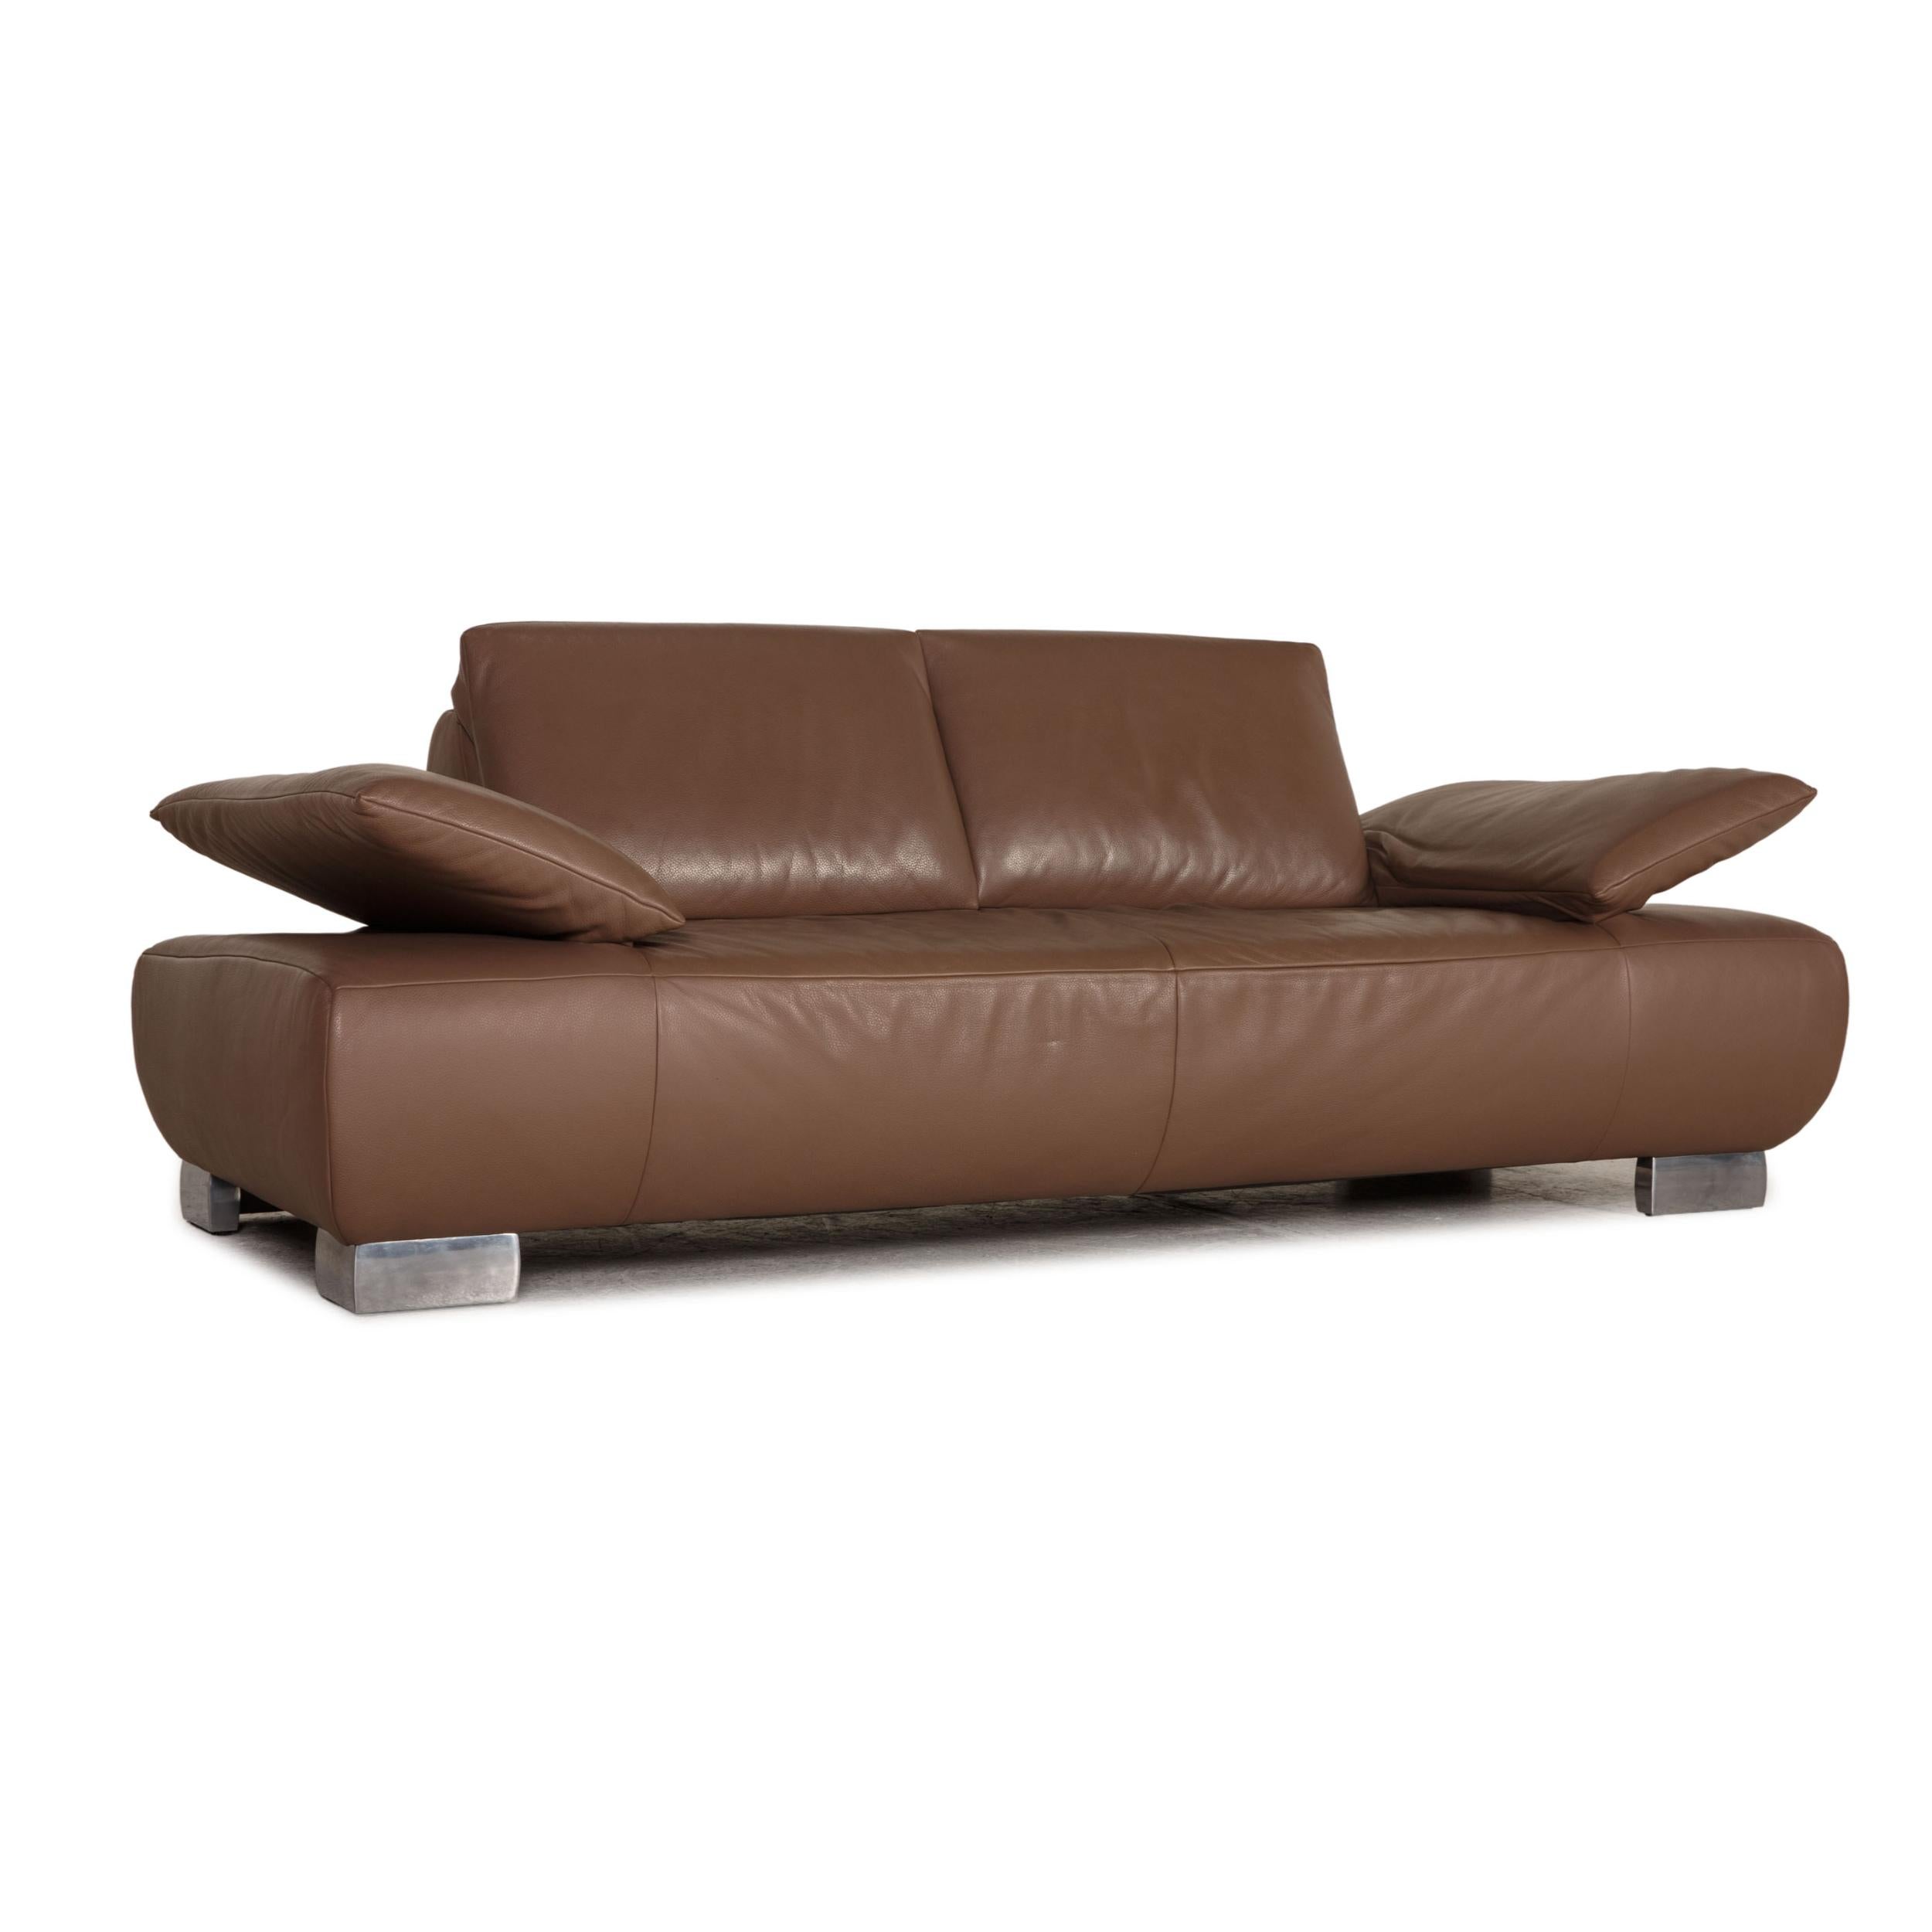 Contemporary Koinor Volare Leather Sofa Brown Two Seater Couch For Sale